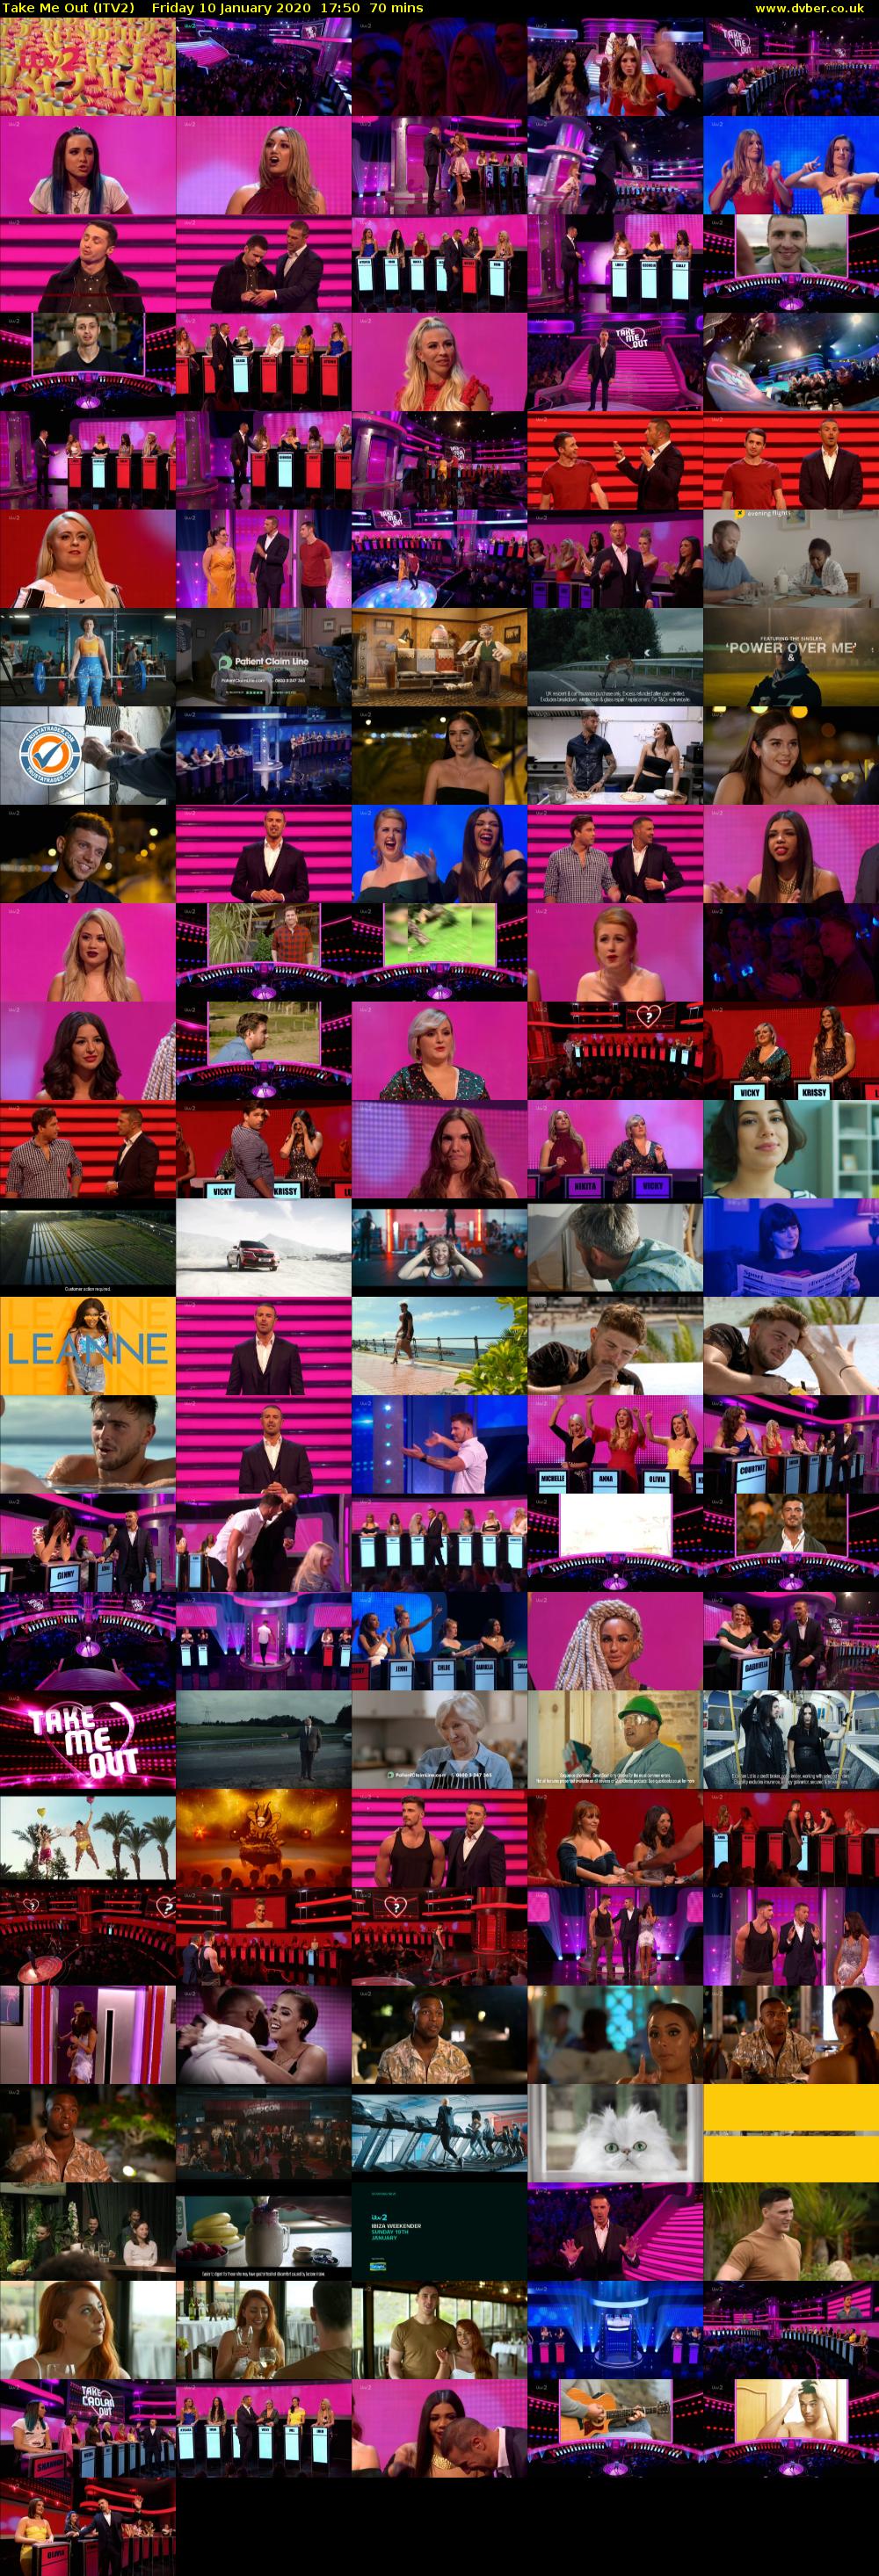 Take Me Out (ITV2) Friday 10 January 2020 17:50 - 19:00